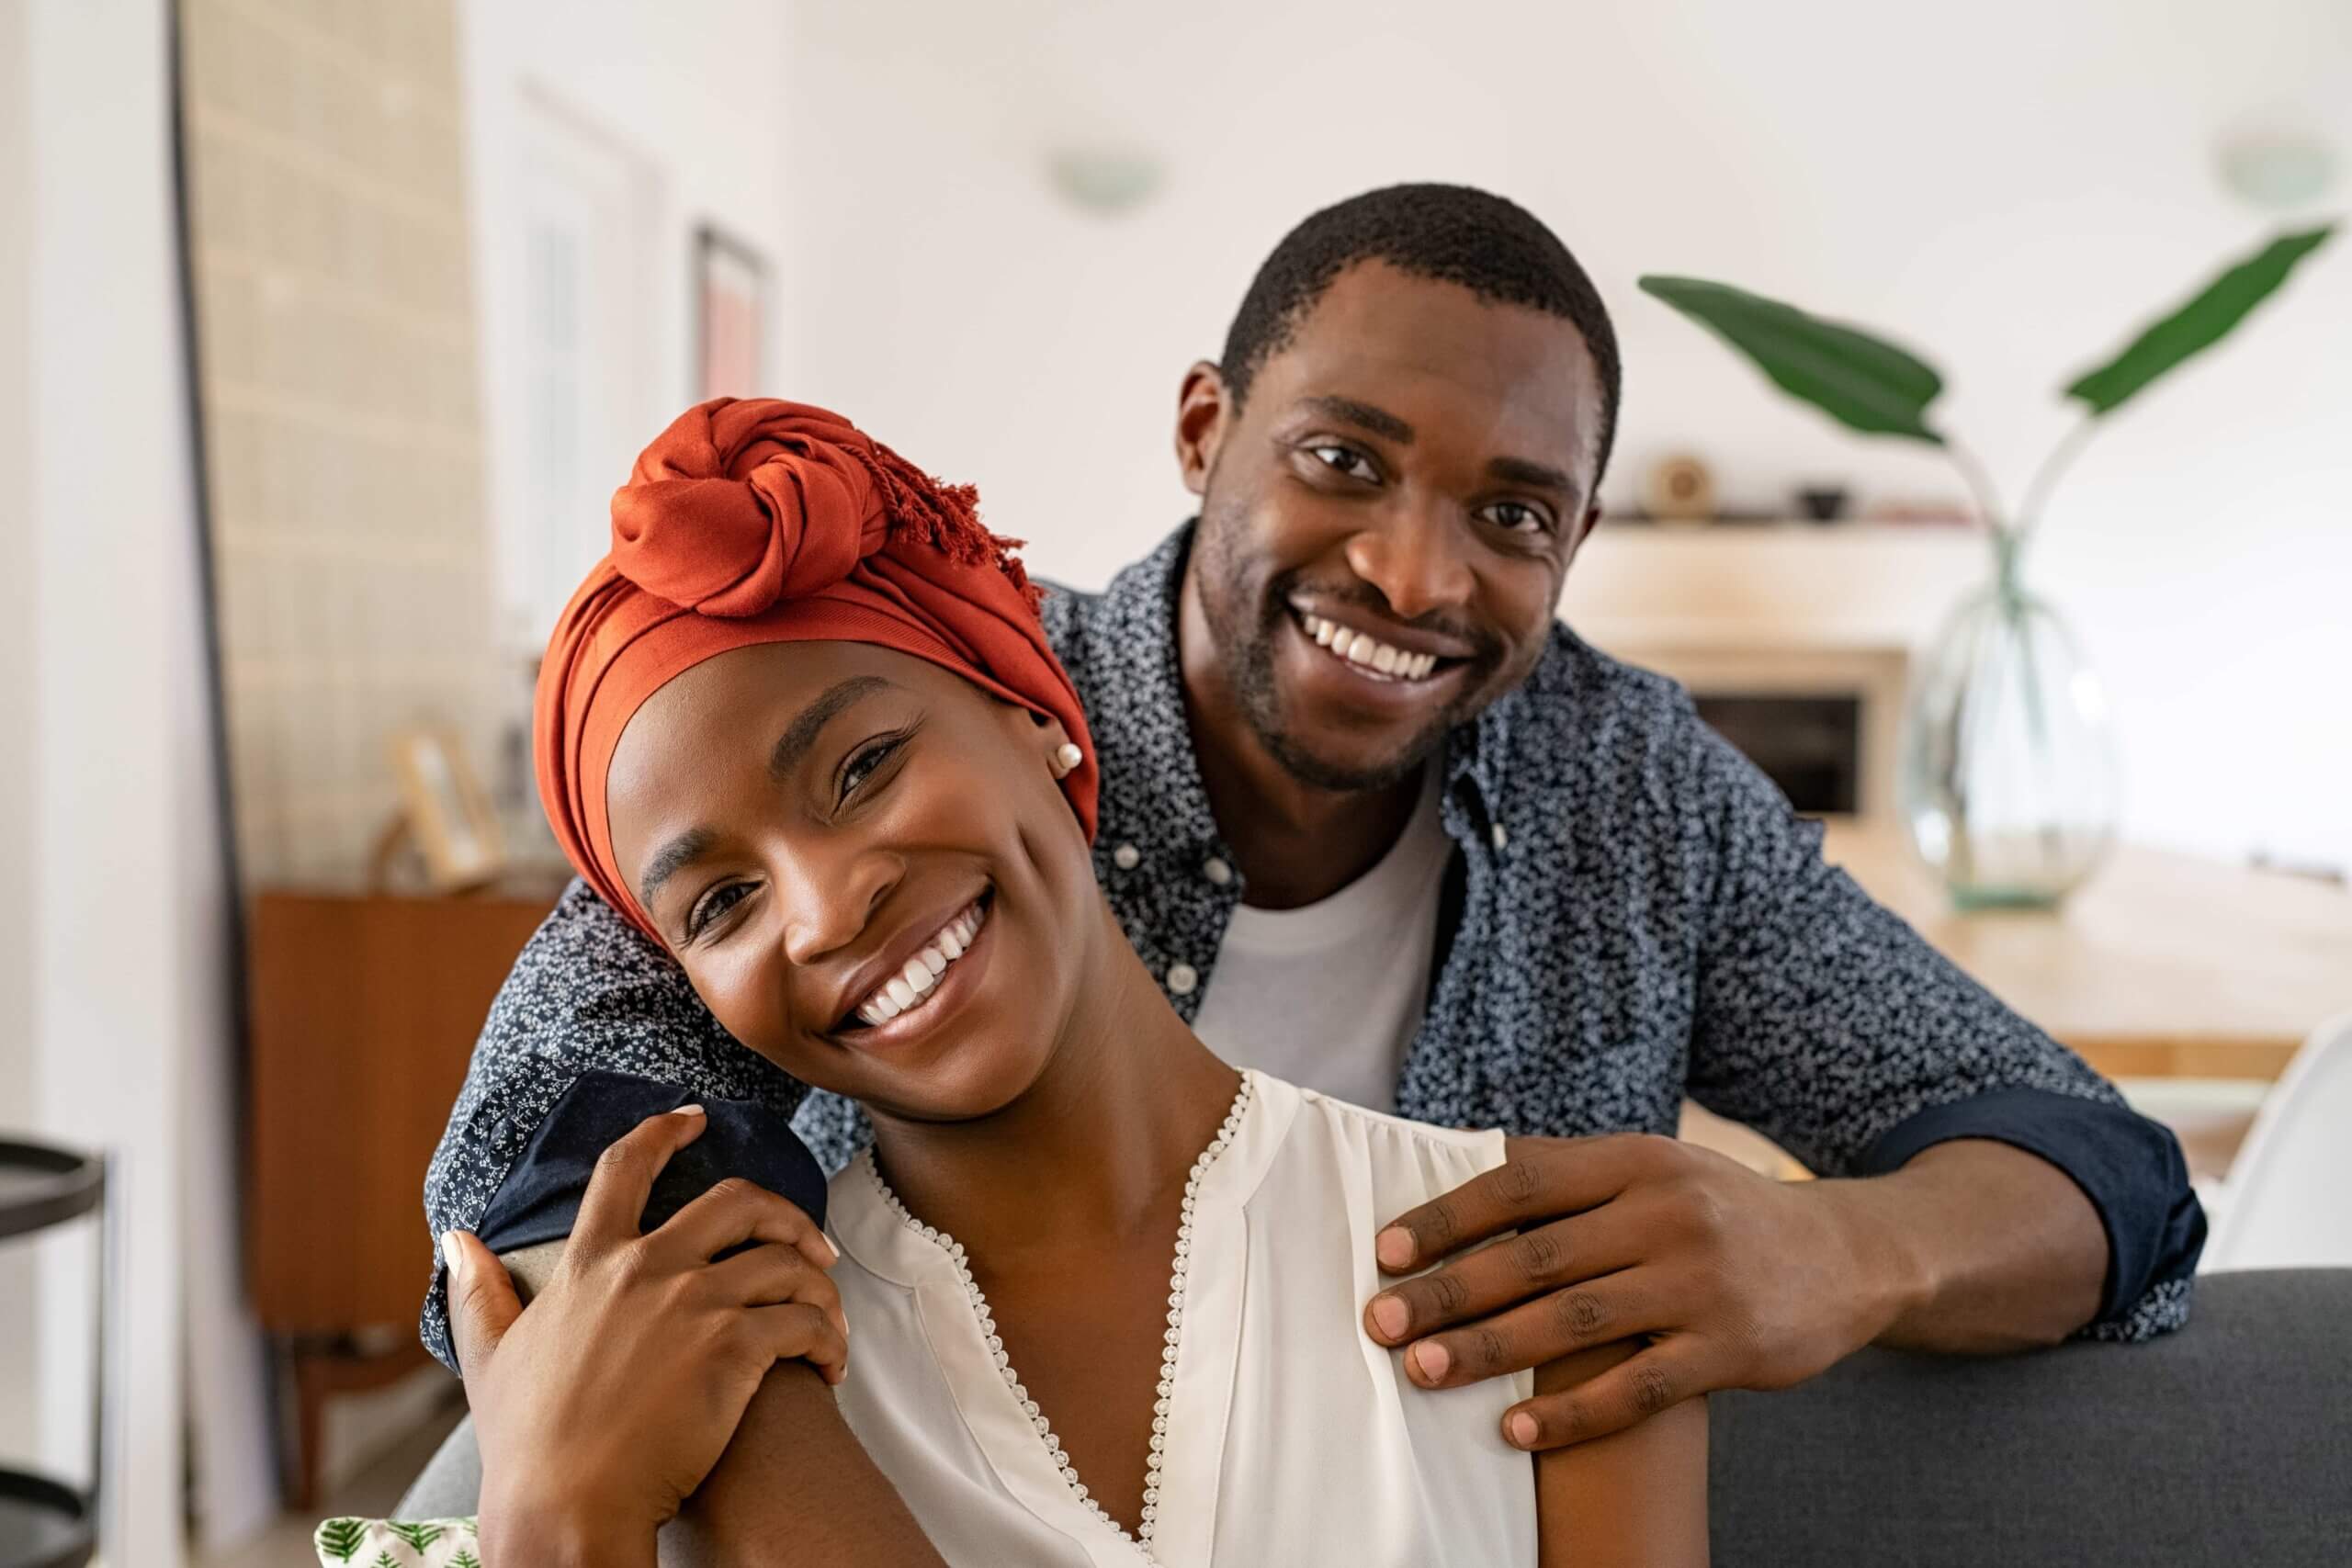 Growing Your Relationship with Smart Financial Choices